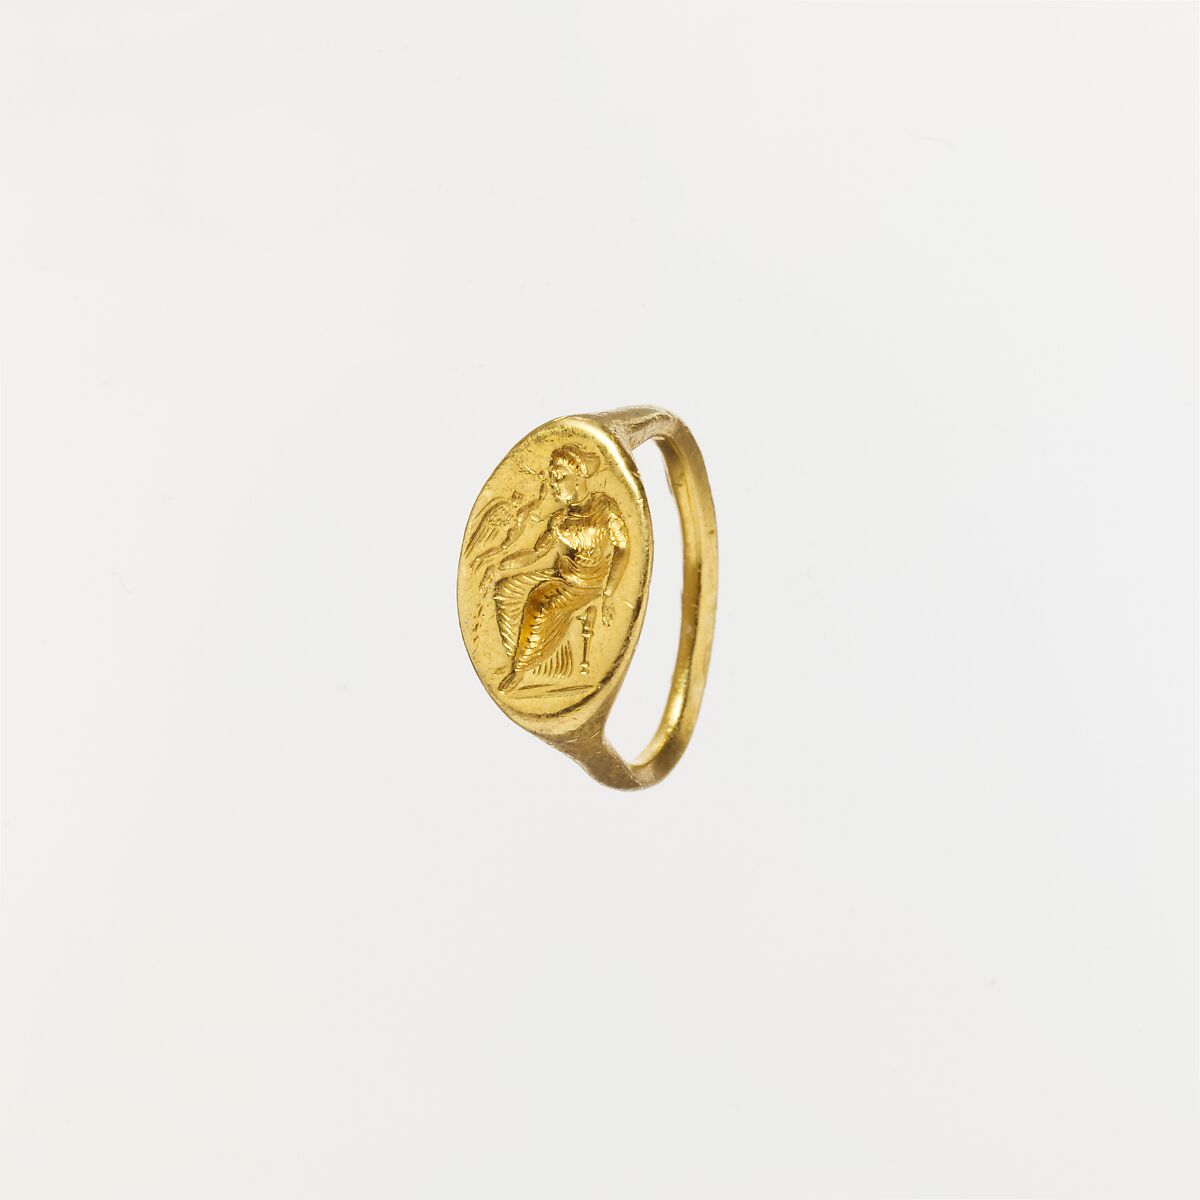 Gold ring with intaglio of seated woman and flying Eros, Gold, Greek 